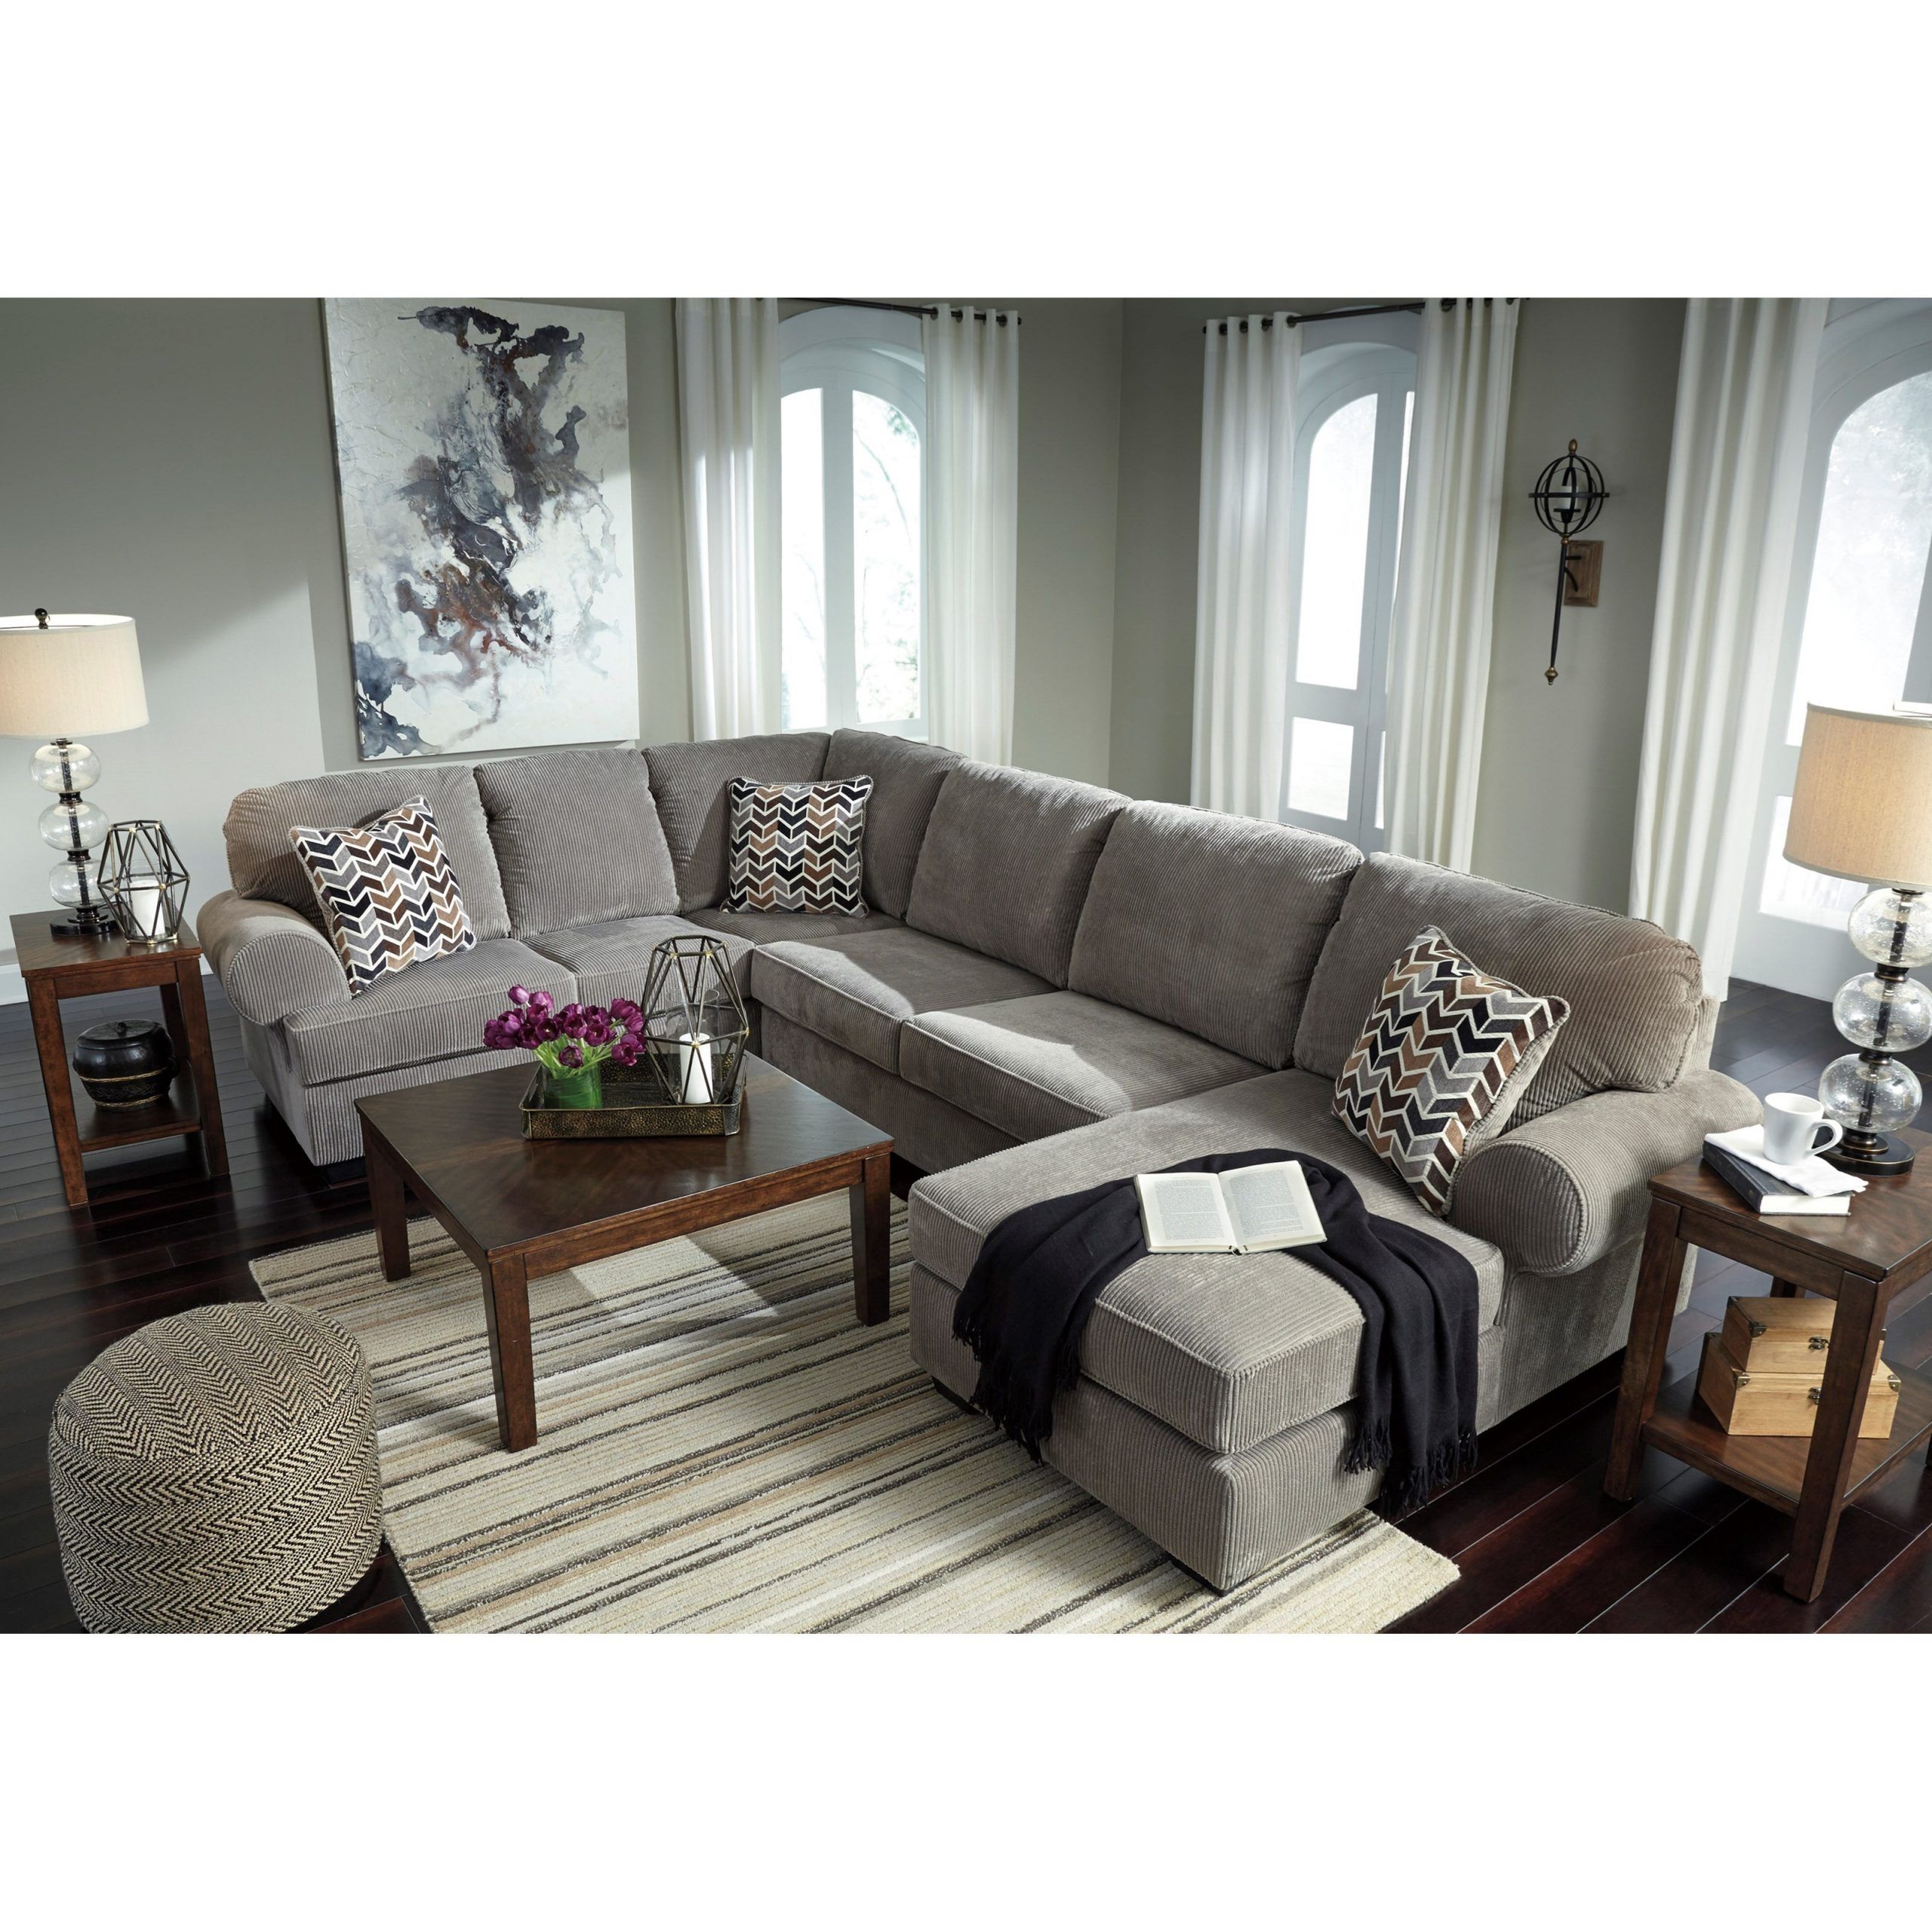 Signature Designashley Jinllingsly Contemporary 3 Pertaining To 3pc Polyfiber Sectional Sofas (View 4 of 15)